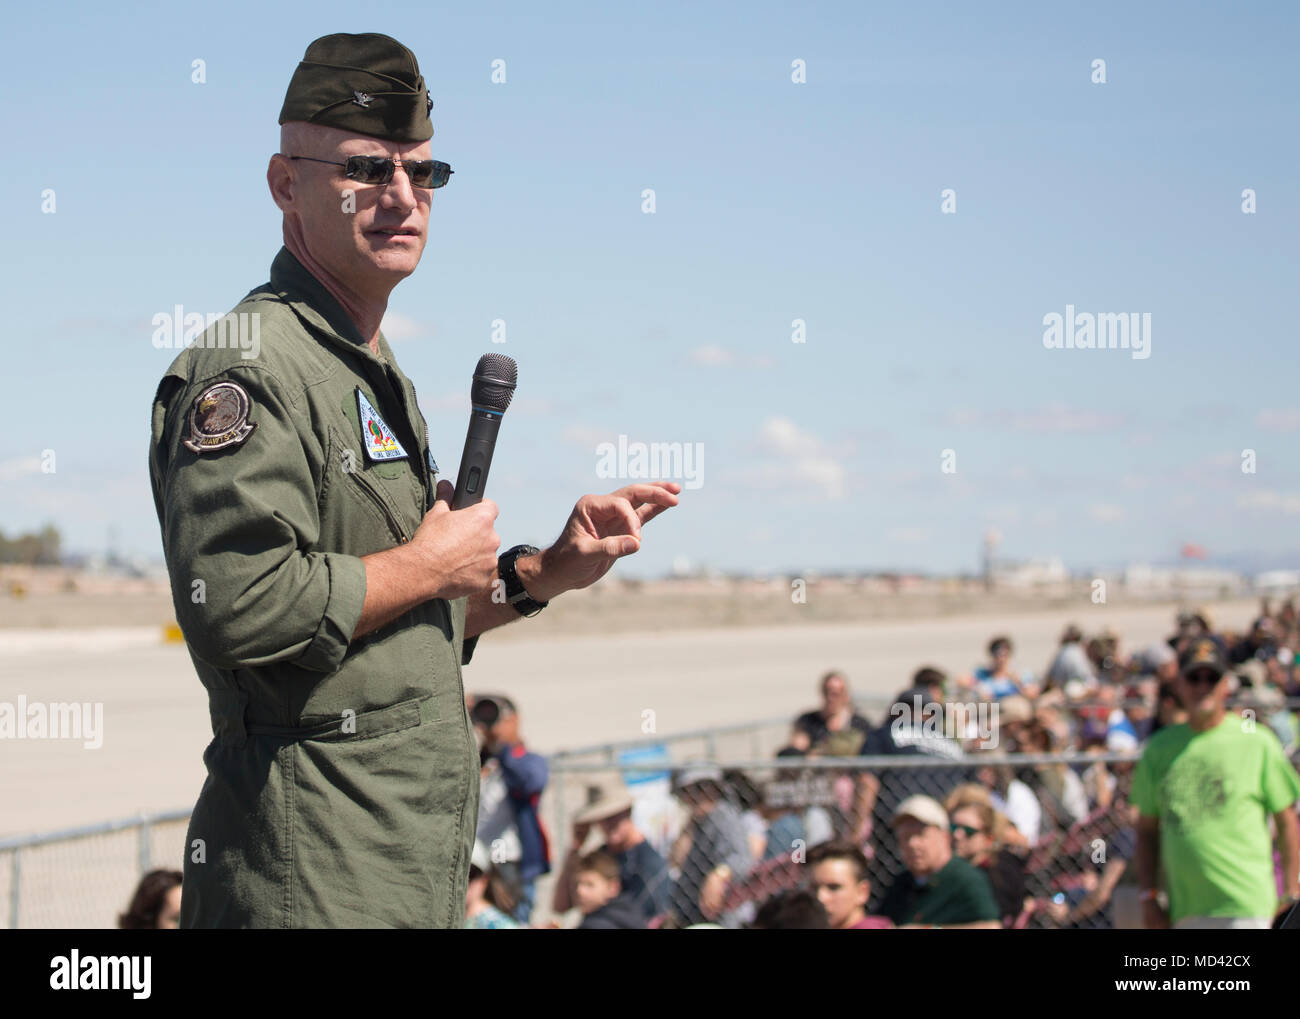 U.S. Marine Corps Col. David A. Suggs, the commanding officer of Marine Corps Air Station Yuma, Ariz., speaks to guests at the 2018 Yuma Airshow Saturday, March 17, 2018. The airshow is MCAS Yuma's only military airshow of the year and provides the community an opportunity to see thrilling aerial and ground performers for free while interacting with Marines and Sailors. (U.S. Marine Corps photo by Lance Cpl. Sabrina Candiaflores) Stock Photo